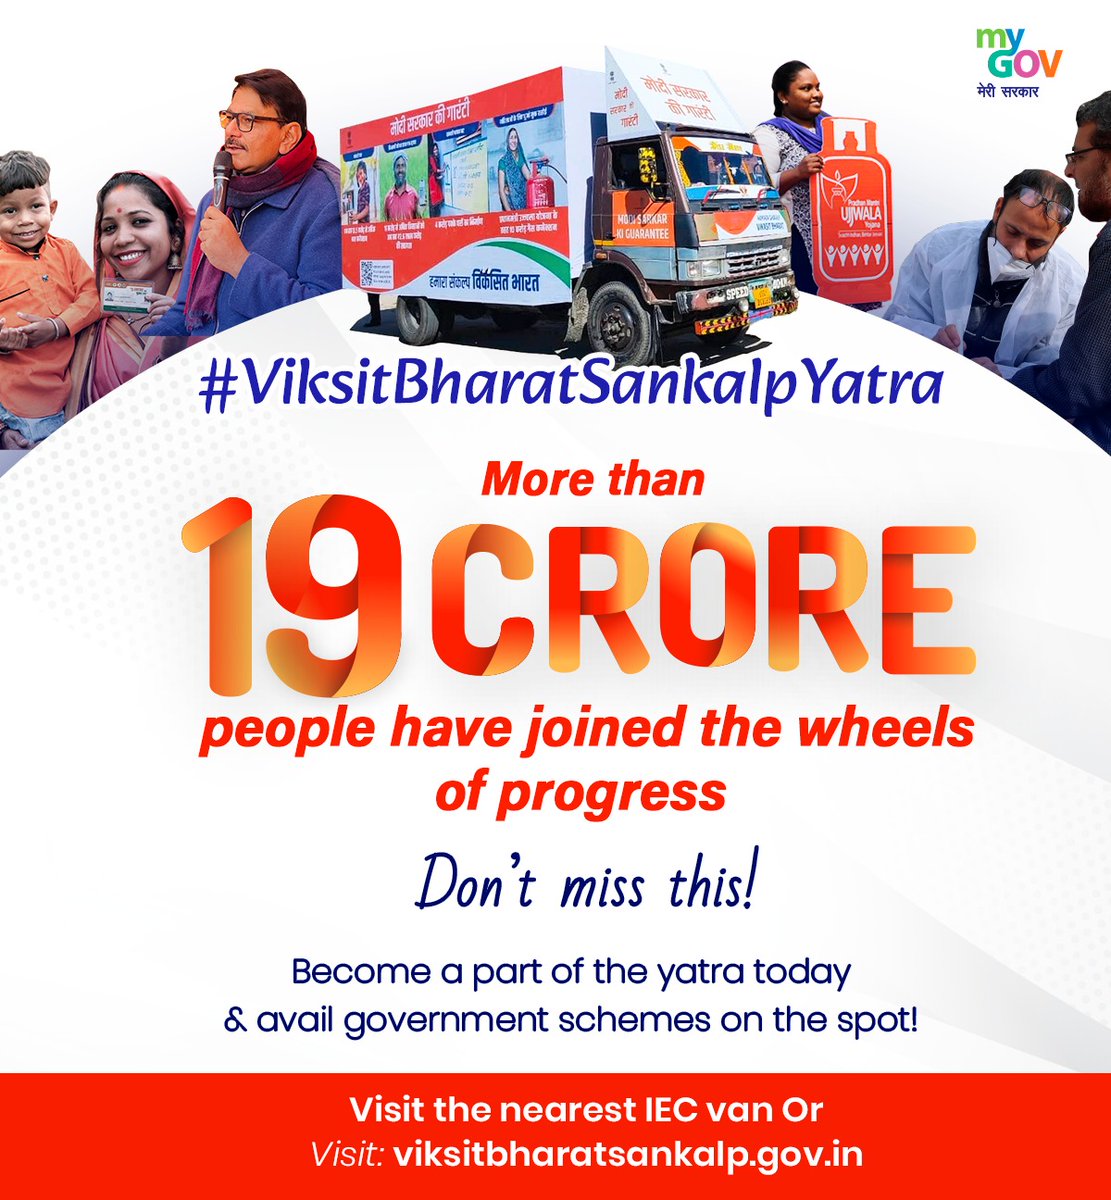 A wave of Janbhagidari has surged with a remarkable 19 crore participants! 

Join the momentum in the #ViksitBharatSankalpYatra as we come together for the mission to shape Bharat into a Viksit Nation. 

Explore further at: viksitbharatsankalp.gov.in 

#HamaraSankalpViksitBharat